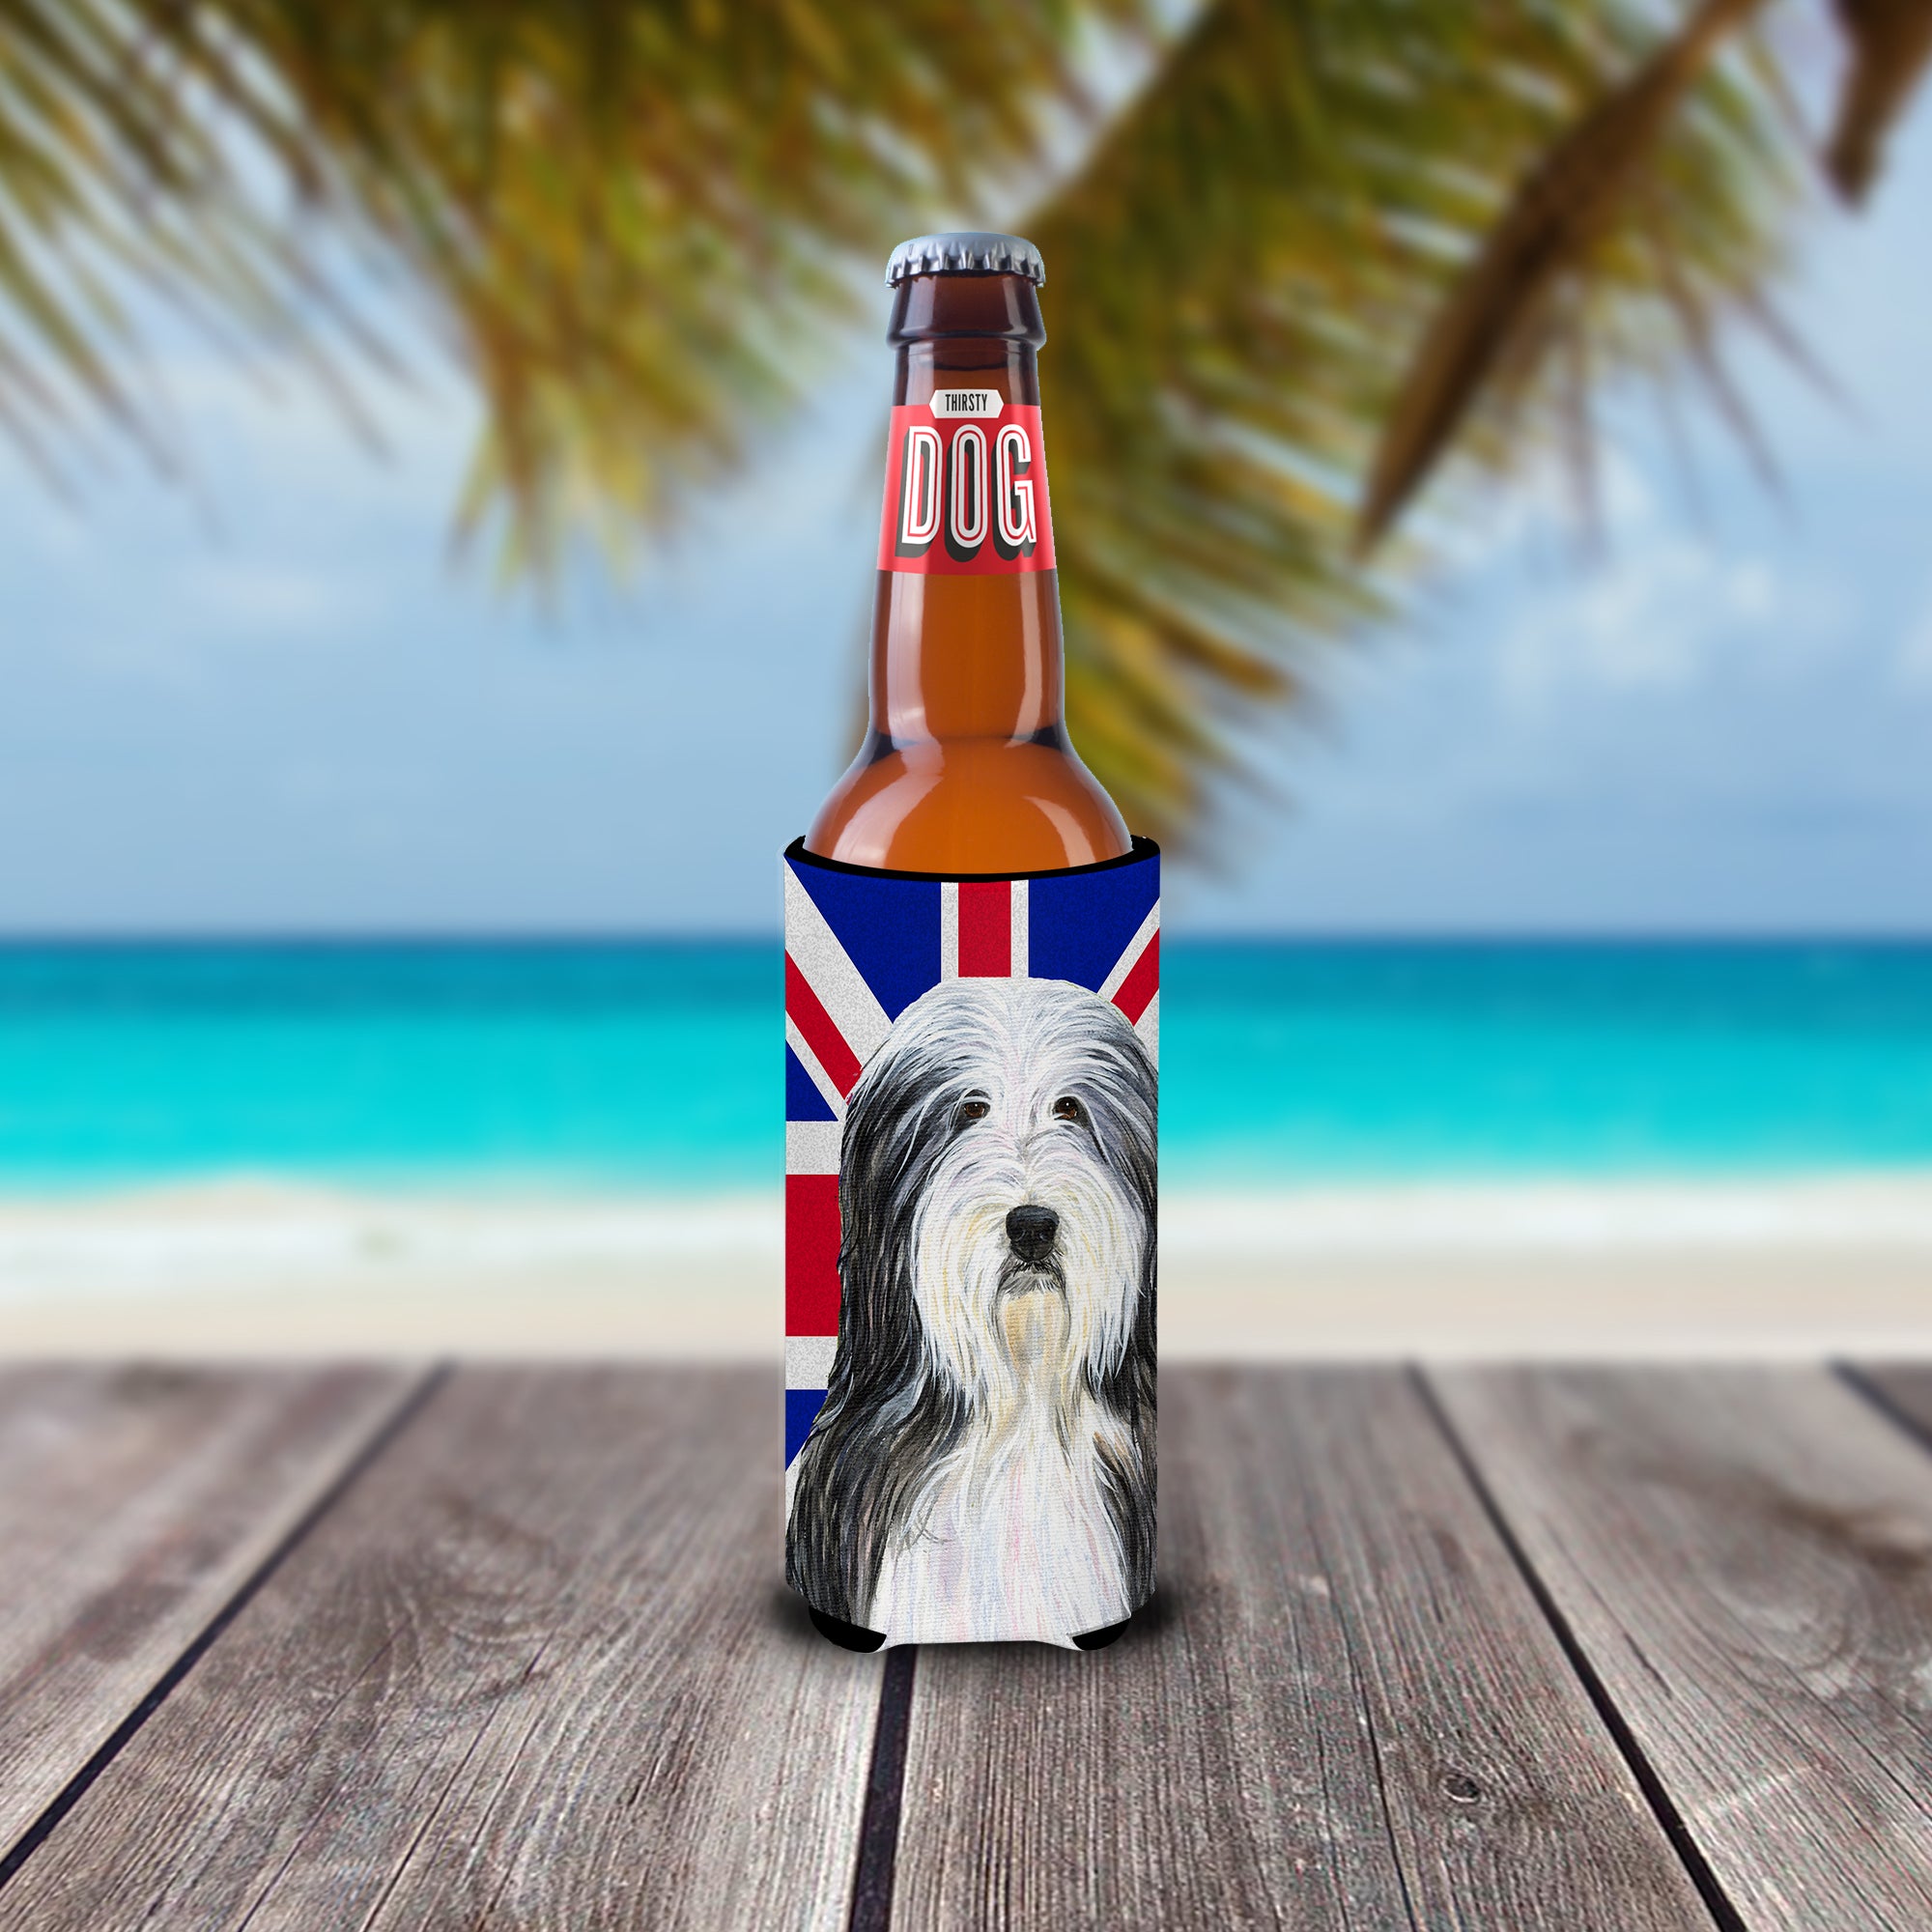 Bearded Collie with English Union Jack British Flag Ultra Beverage Insulators for slim cans SS4939MUK